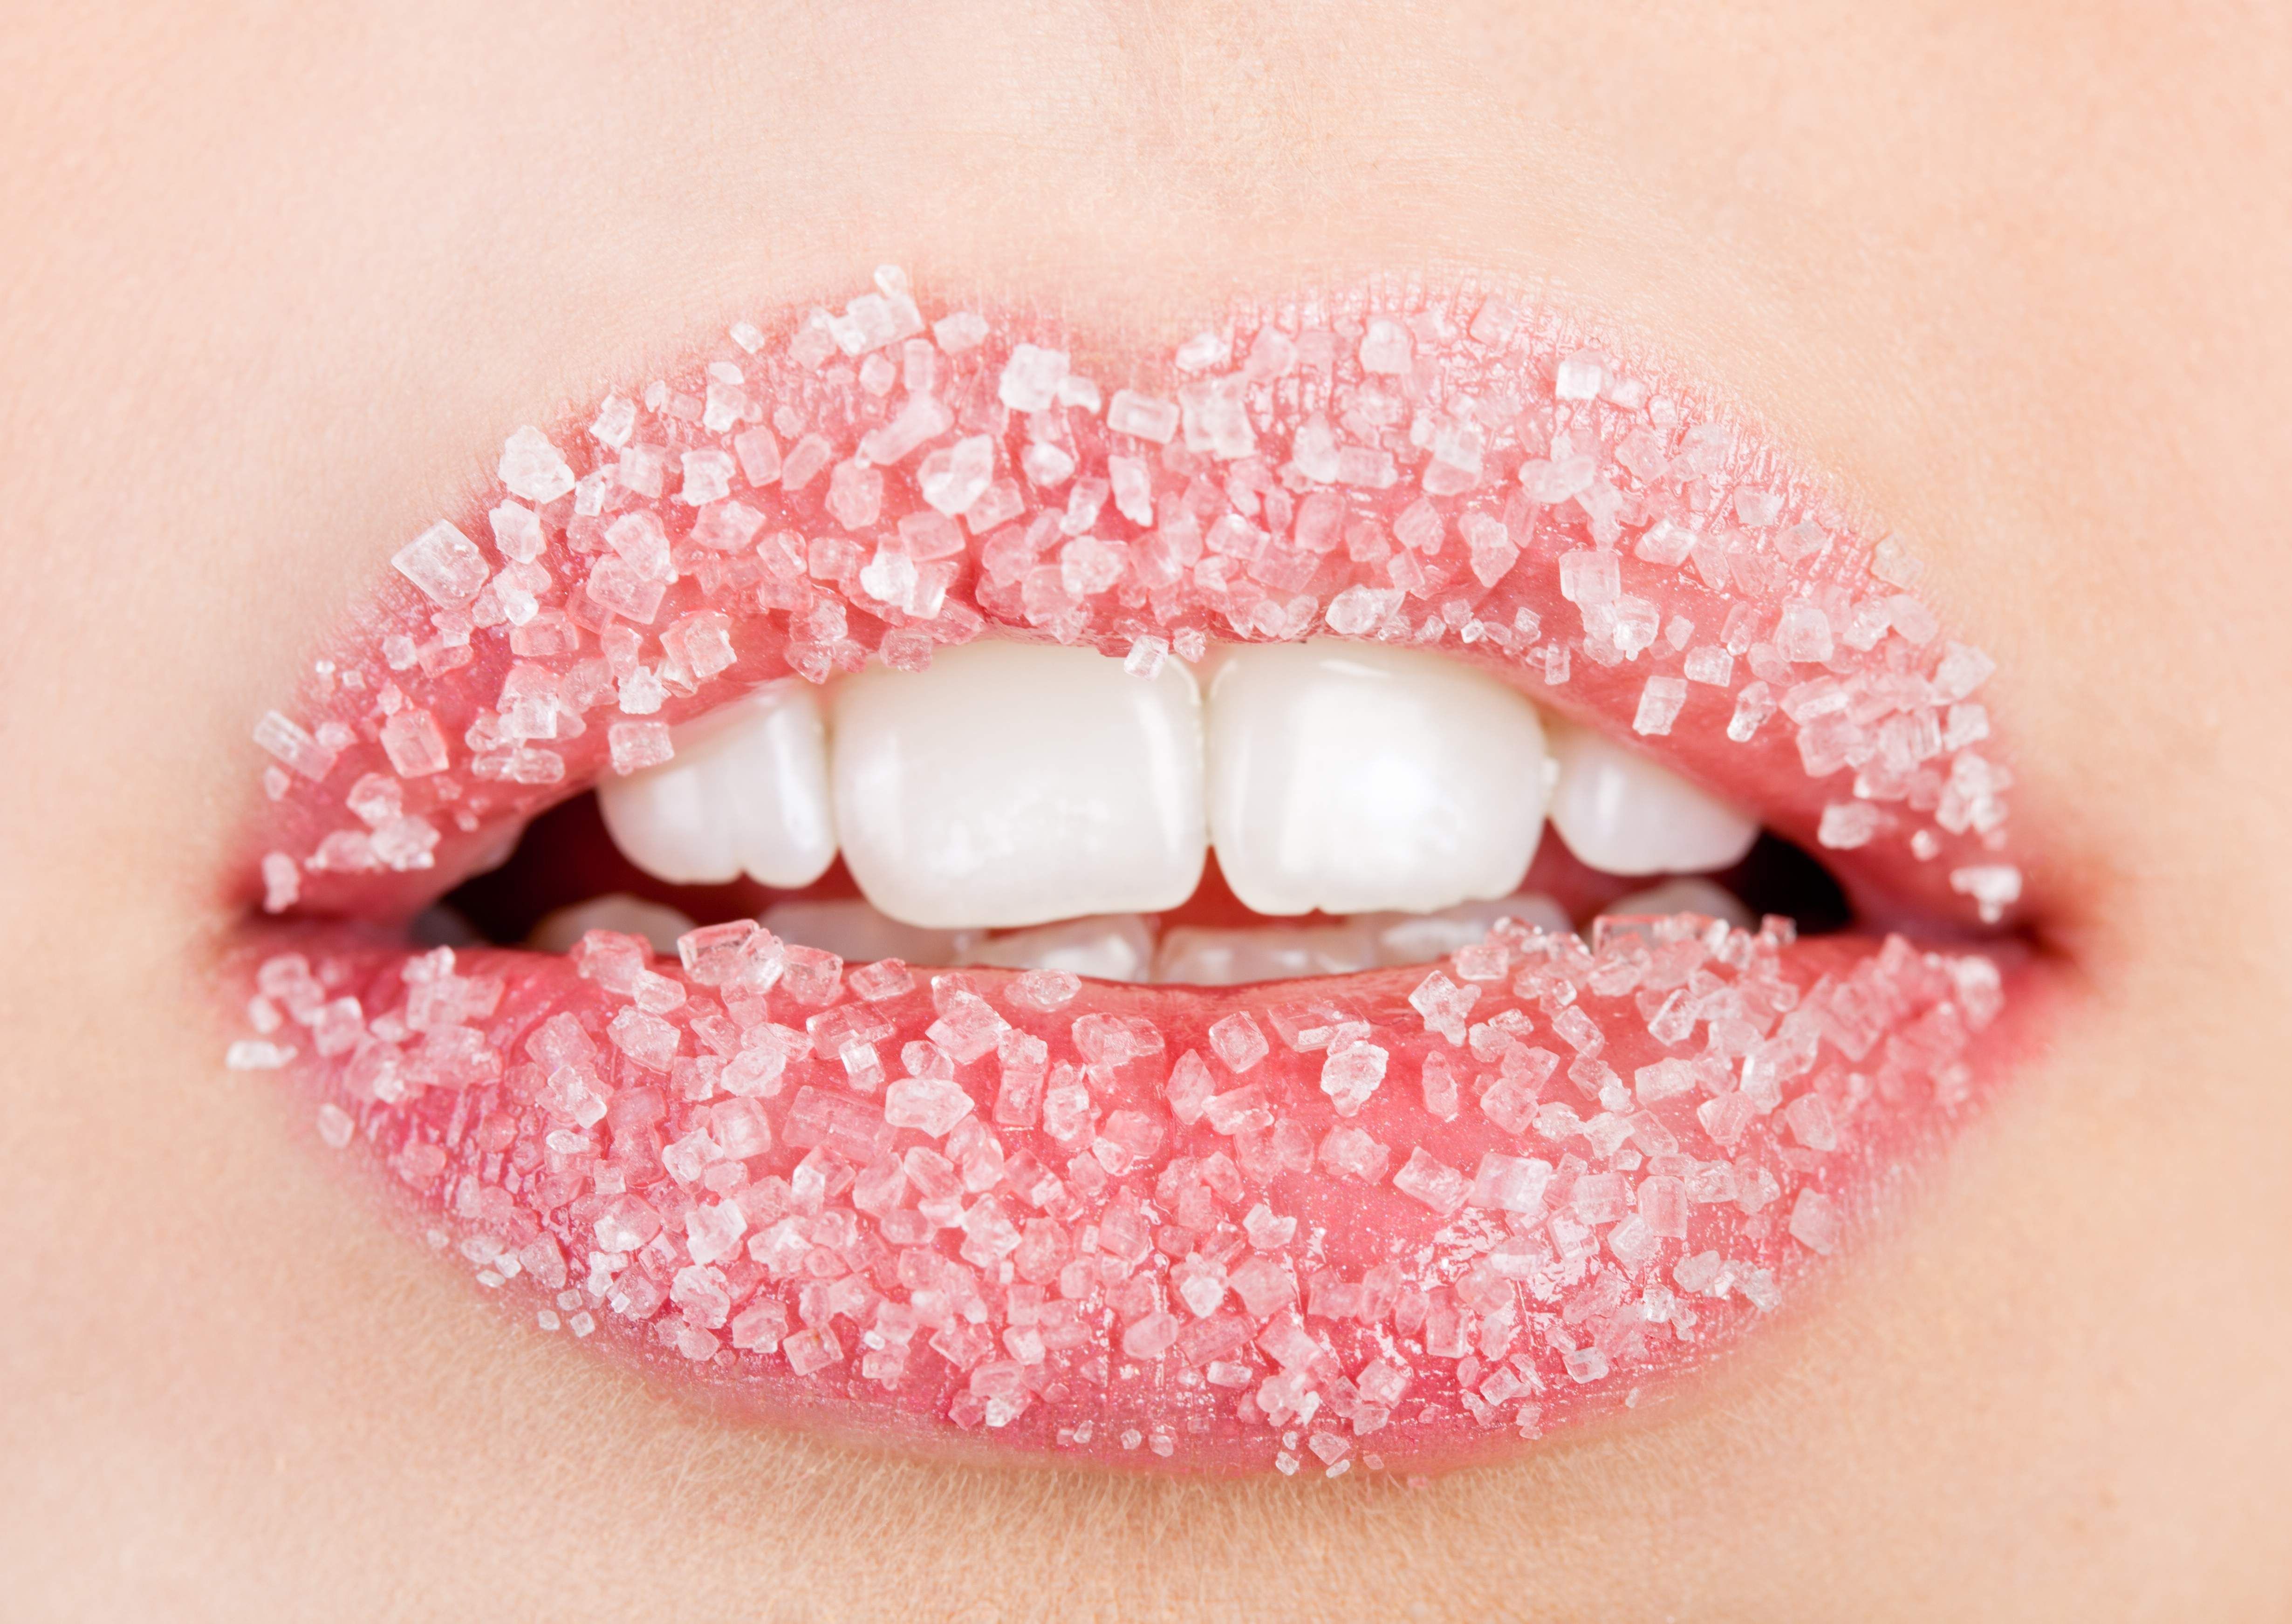 Sugar Lips Wallpaper Image Photos Pictures Background